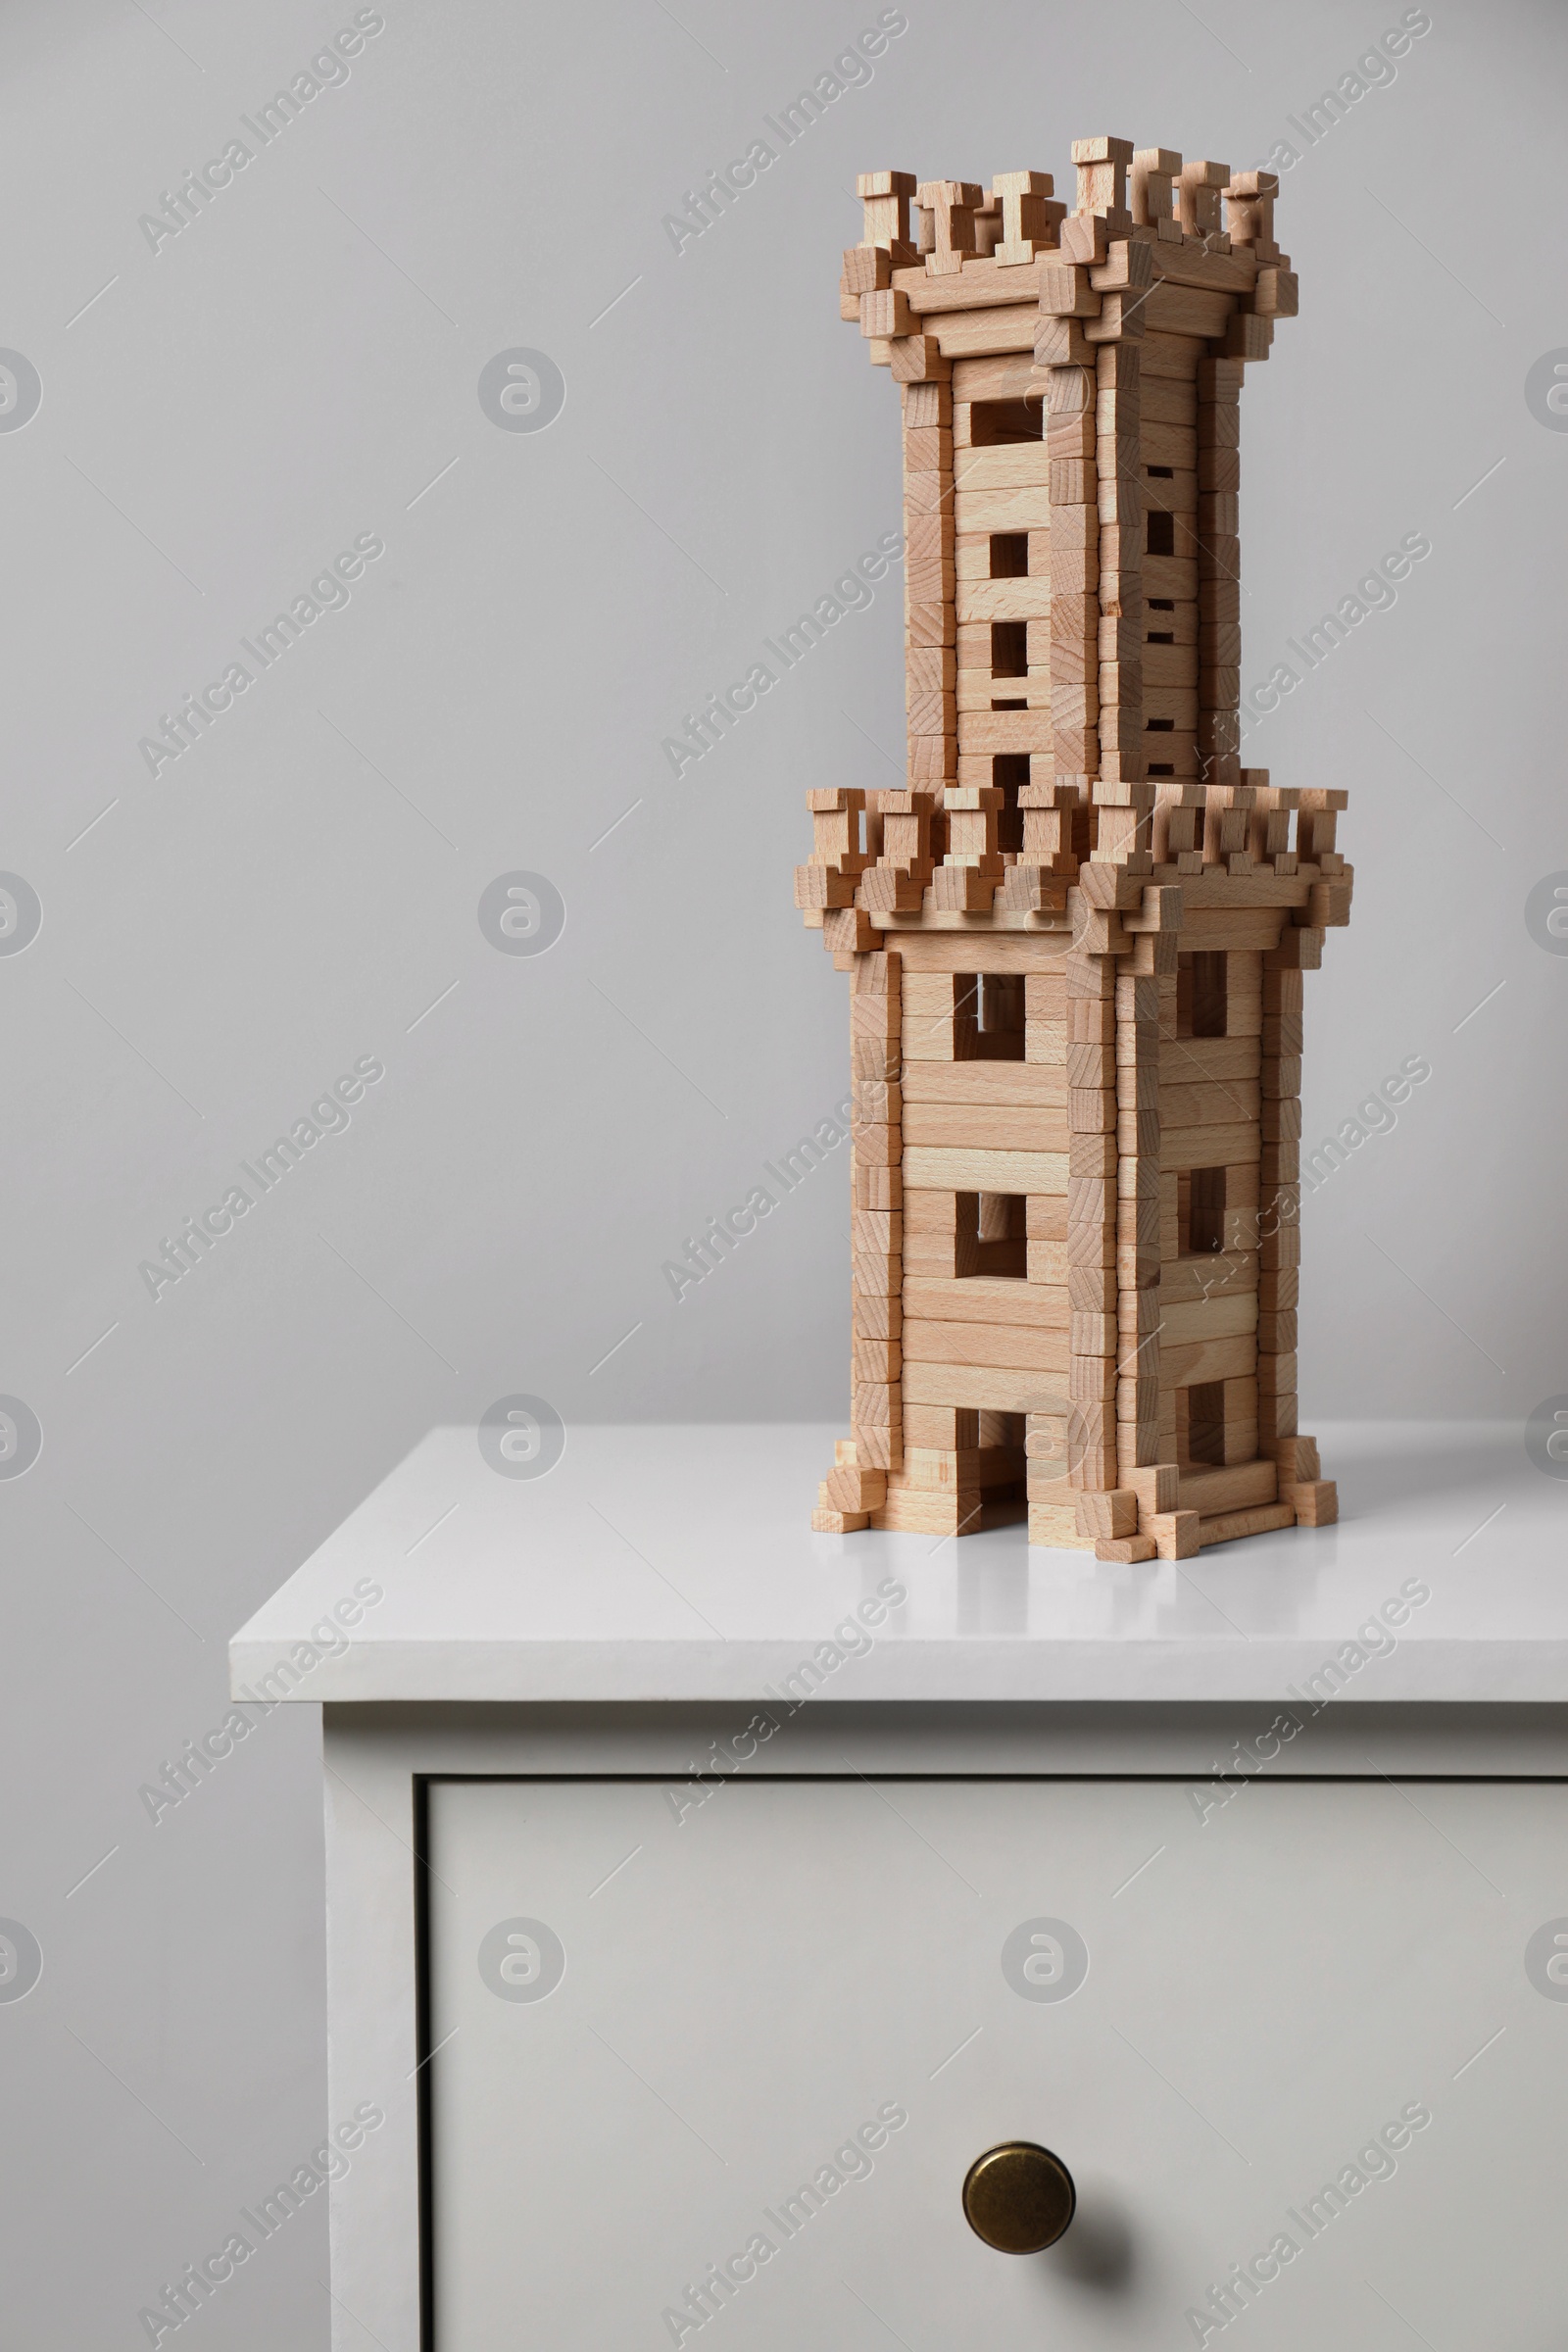 Photo of Wooden tower on chest of drawers near light grey wall. Children's toy